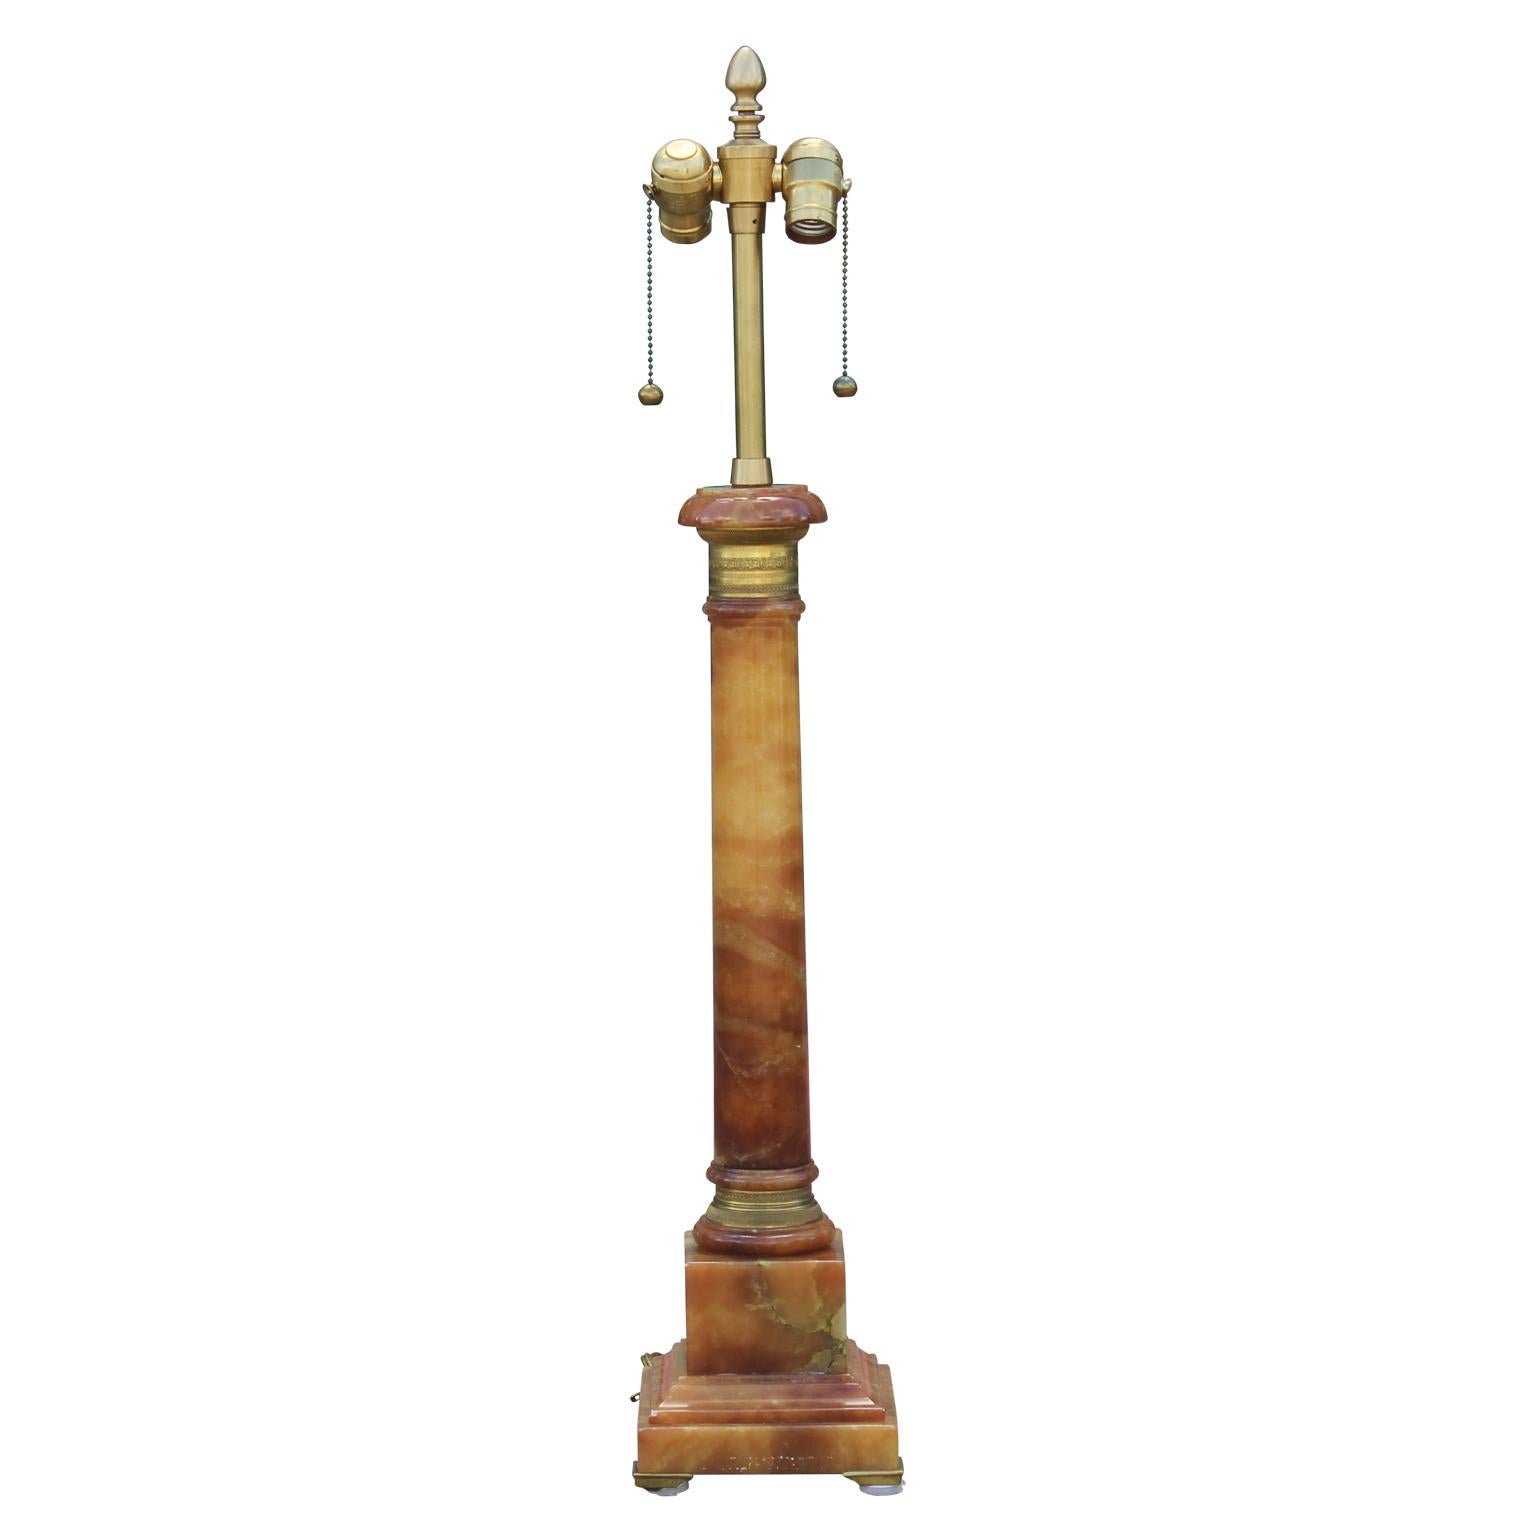 Gorgeous single Hollywood Regency onyx and brass table lamp with two light sockets and brass chain pulls.